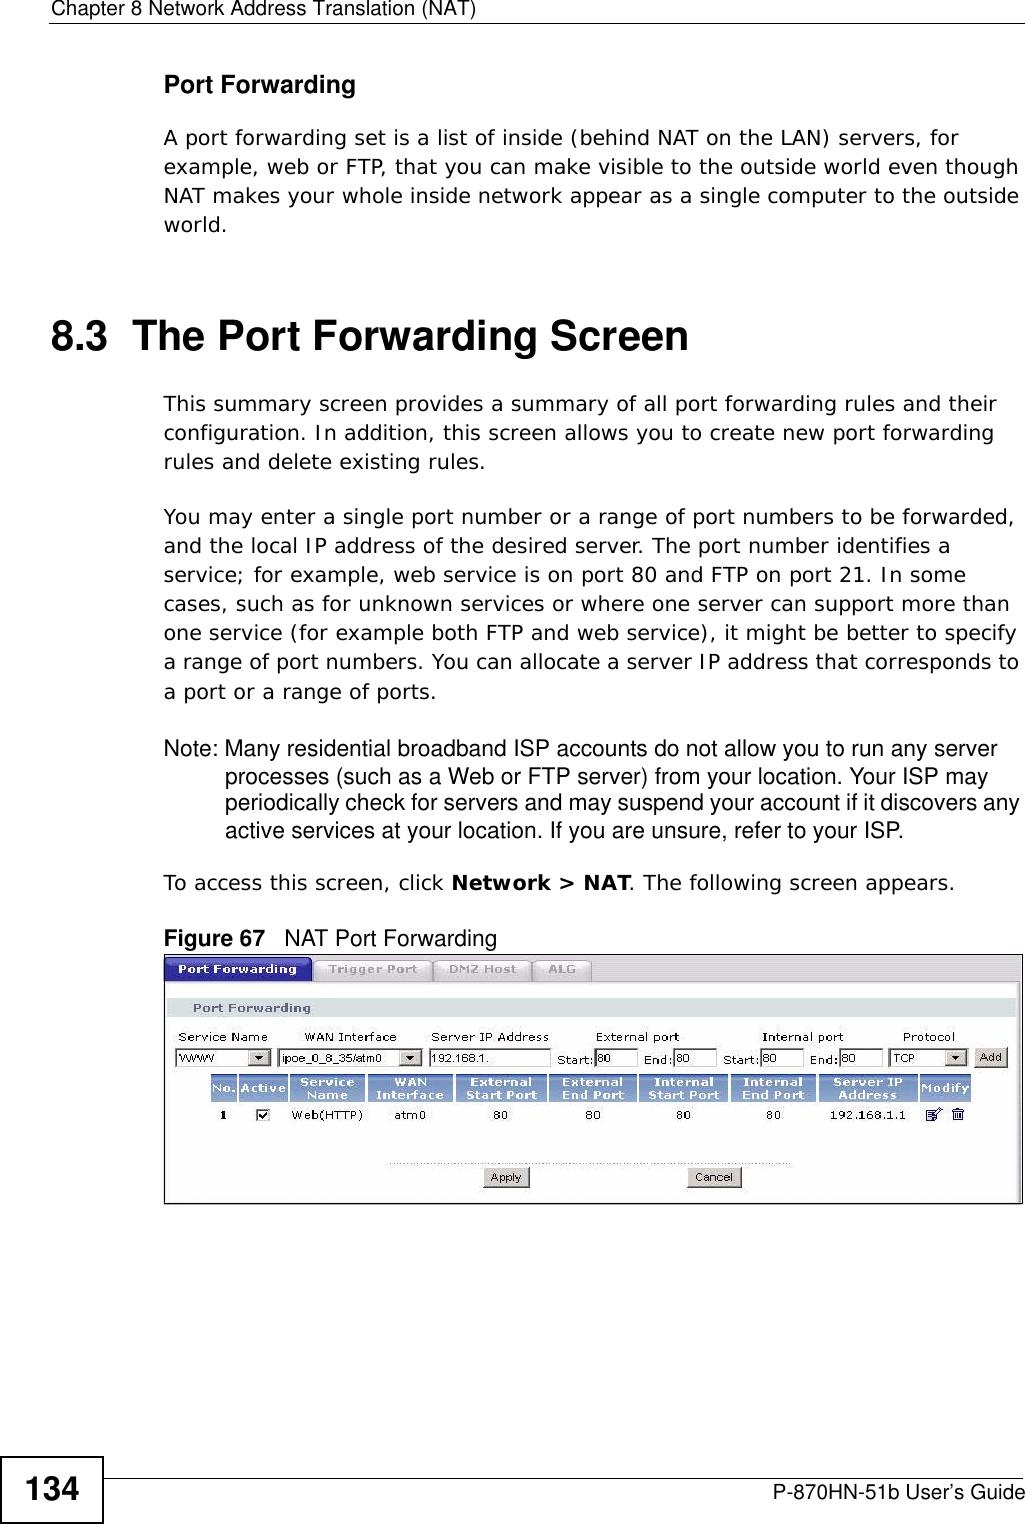 Chapter 8 Network Address Translation (NAT)P-870HN-51b User’s Guide134Port ForwardingA port forwarding set is a list of inside (behind NAT on the LAN) servers, for example, web or FTP, that you can make visible to the outside world even though NAT makes your whole inside network appear as a single computer to the outside world.8.3  The Port Forwarding ScreenThis summary screen provides a summary of all port forwarding rules and their configuration. In addition, this screen allows you to create new port forwarding rules and delete existing rules.You may enter a single port number or a range of port numbers to be forwarded, and the local IP address of the desired server. The port number identifies a service; for example, web service is on port 80 and FTP on port 21. In some cases, such as for unknown services or where one server can support more than one service (for example both FTP and web service), it might be better to specify a range of port numbers. You can allocate a server IP address that corresponds to a port or a range of ports.Note: Many residential broadband ISP accounts do not allow you to run any server processes (such as a Web or FTP server) from your location. Your ISP may periodically check for servers and may suspend your account if it discovers any active services at your location. If you are unsure, refer to your ISP.To access this screen, click Network &gt; NAT. The following screen appears.Figure 67   NAT Port Forwarding 